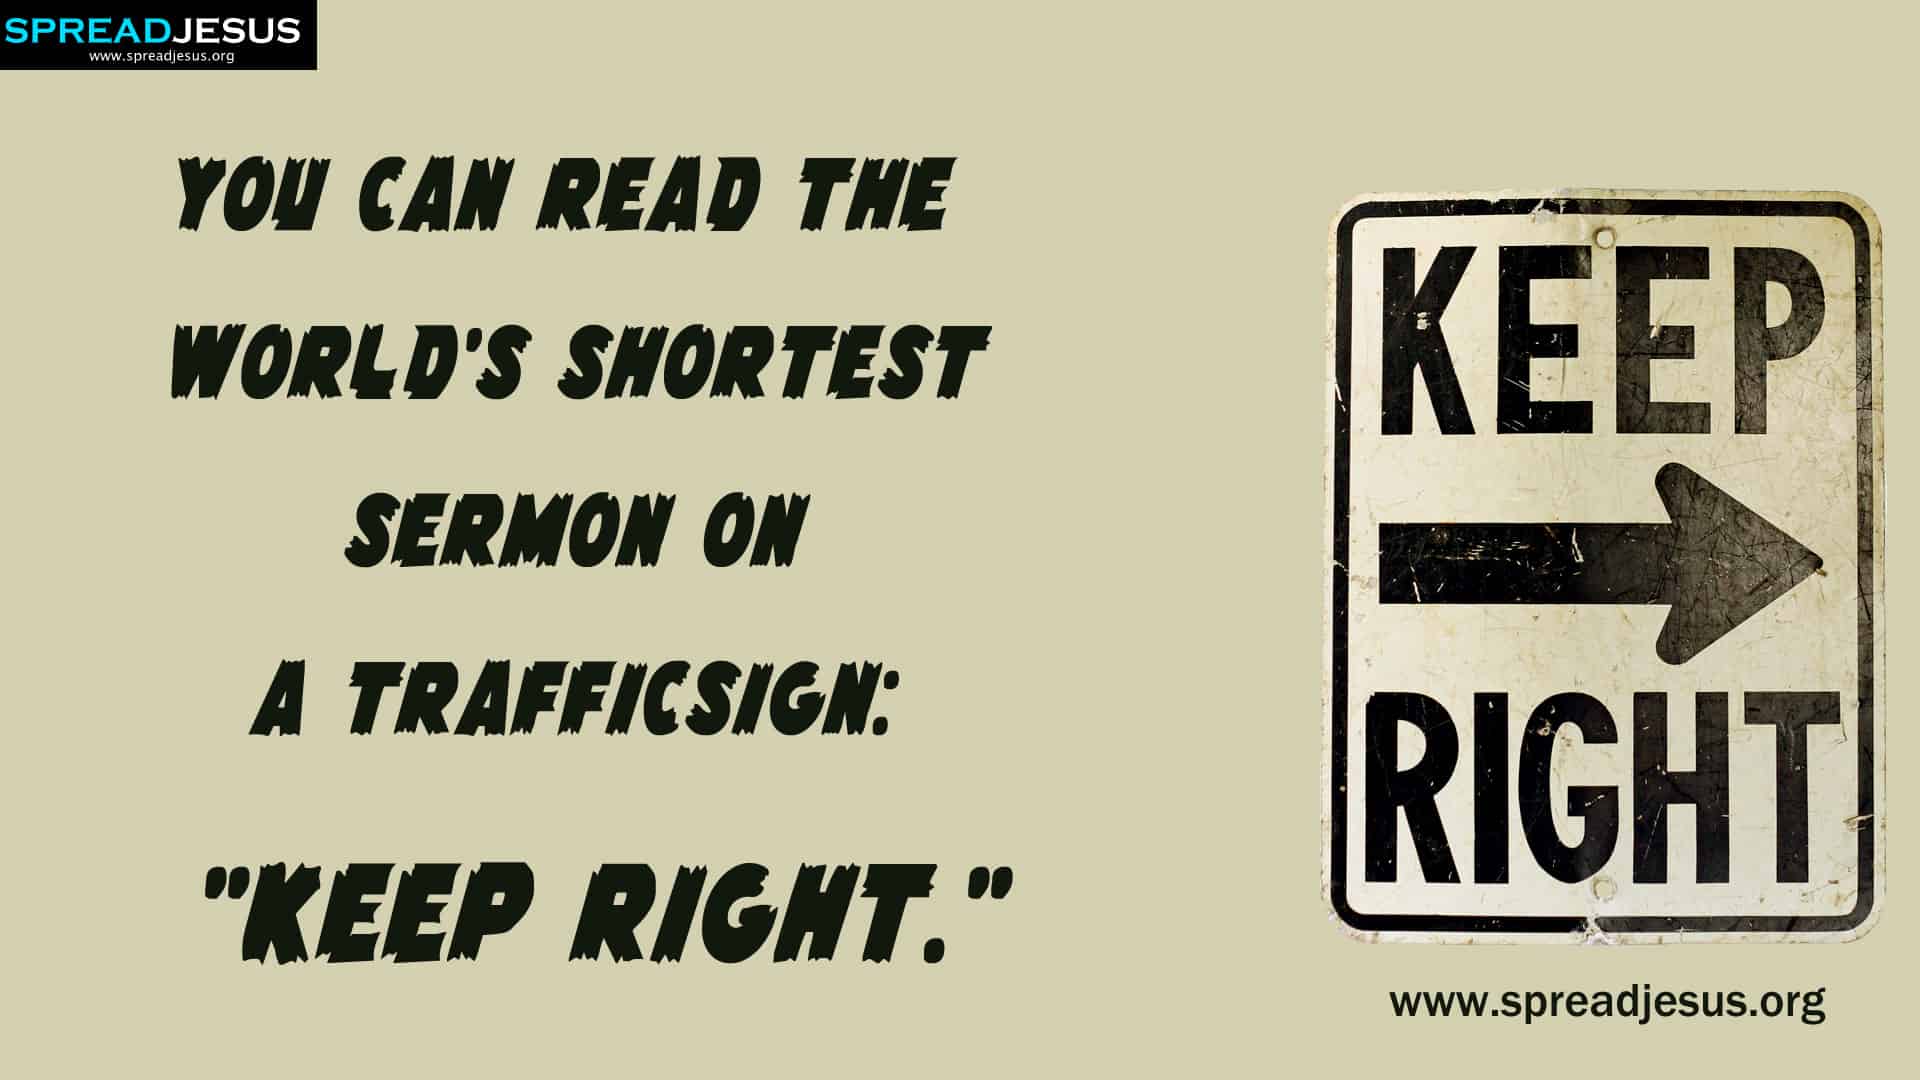 the-worlds-shortest-sermon-on-a-trafficsign-Keep-right-CHRISTIAN-QUOTES-HD.jpg